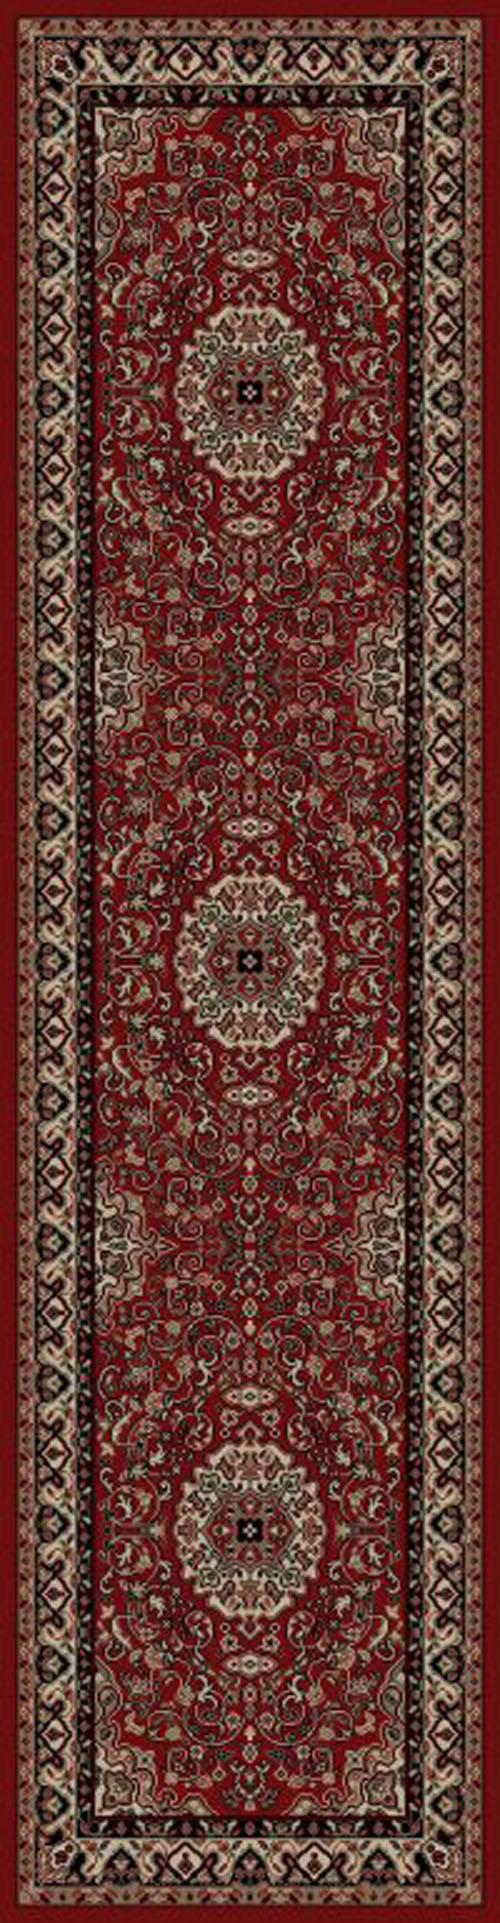 concord global persian classics isfahan red